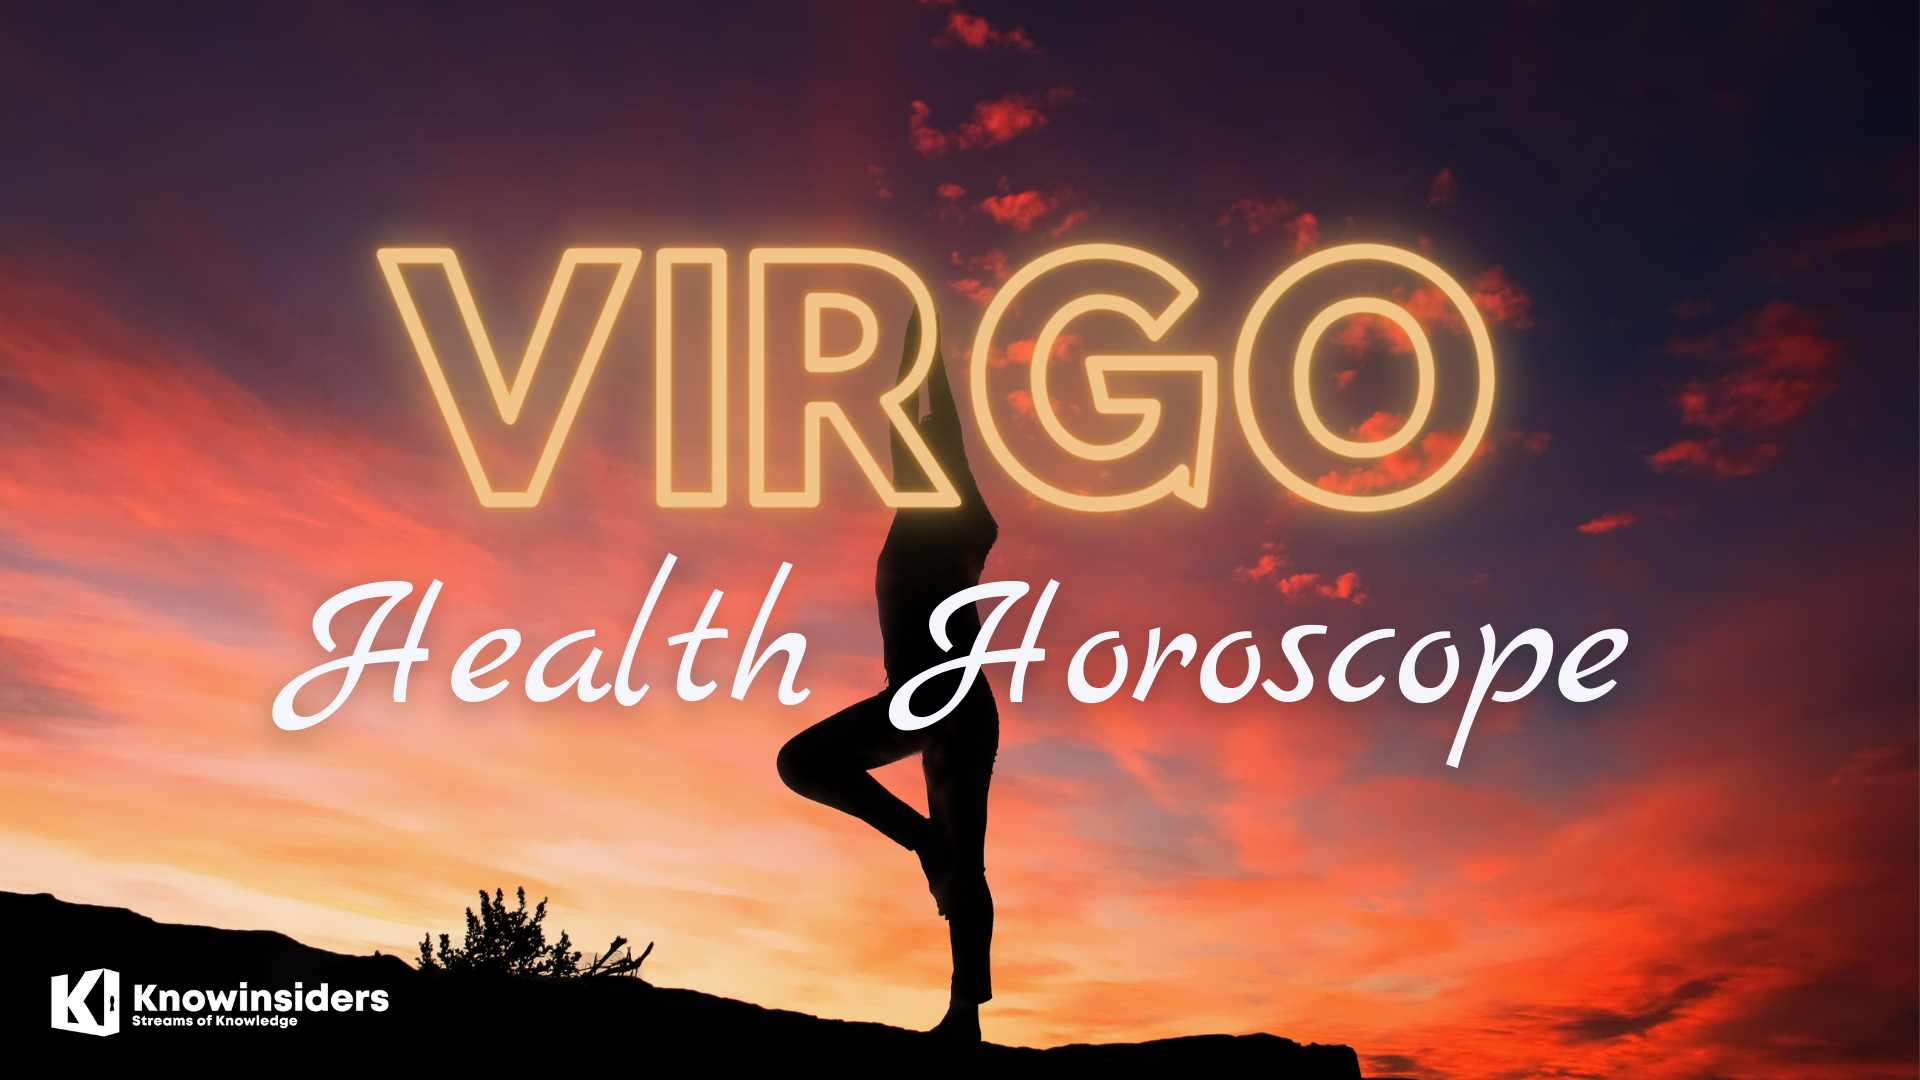 VIRGO Horoscope: Astrological Prediction for Your Beauty and Health